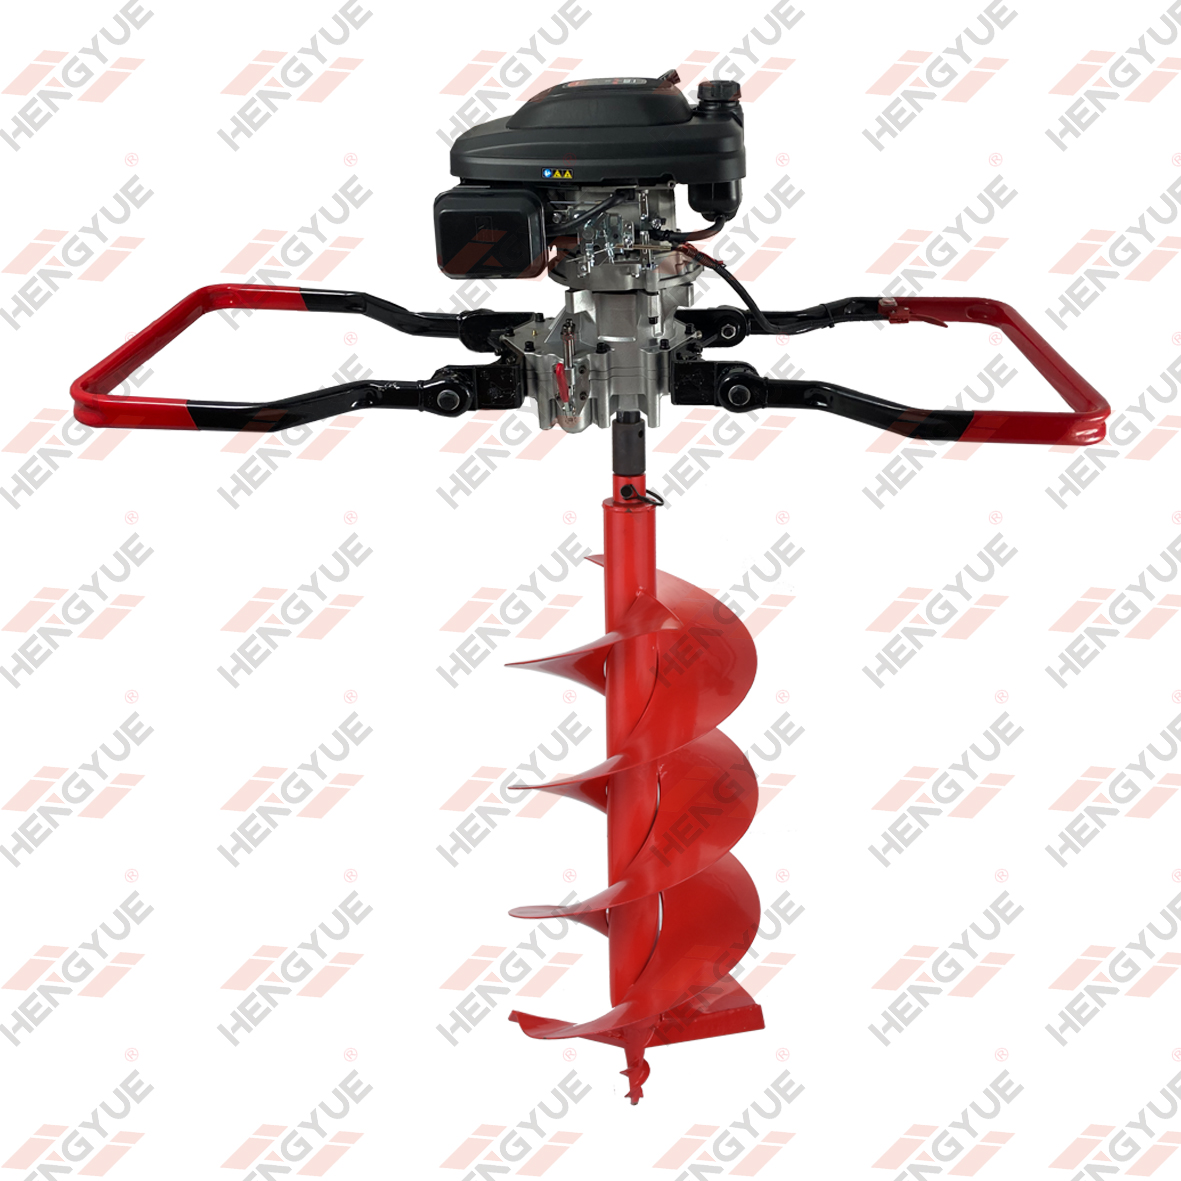 Reverse Function 225CC 4 Stroke Engine Power Earth Auger Machine 